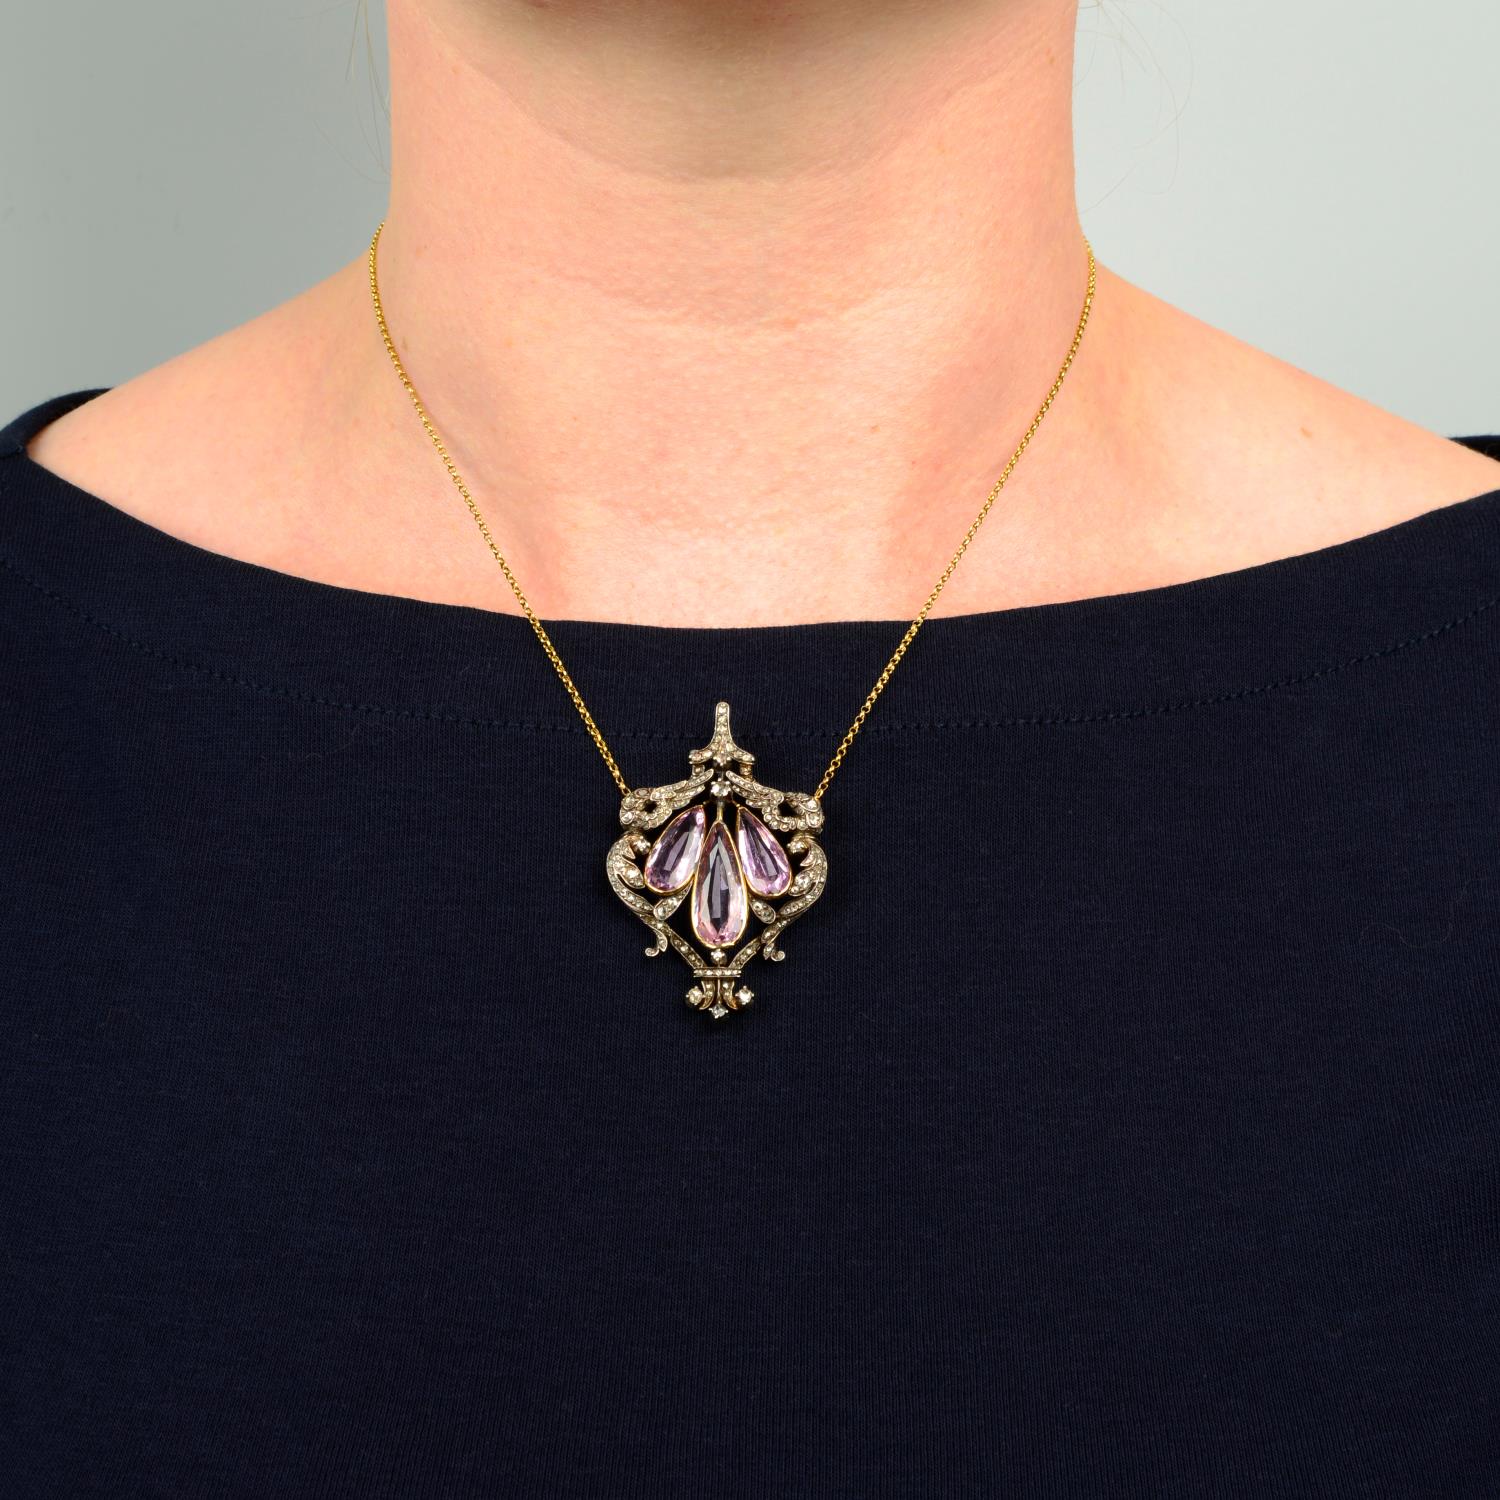 A 19th century silver and gold, pink topaz and diamond pendant, on chain. - Image 3 of 5